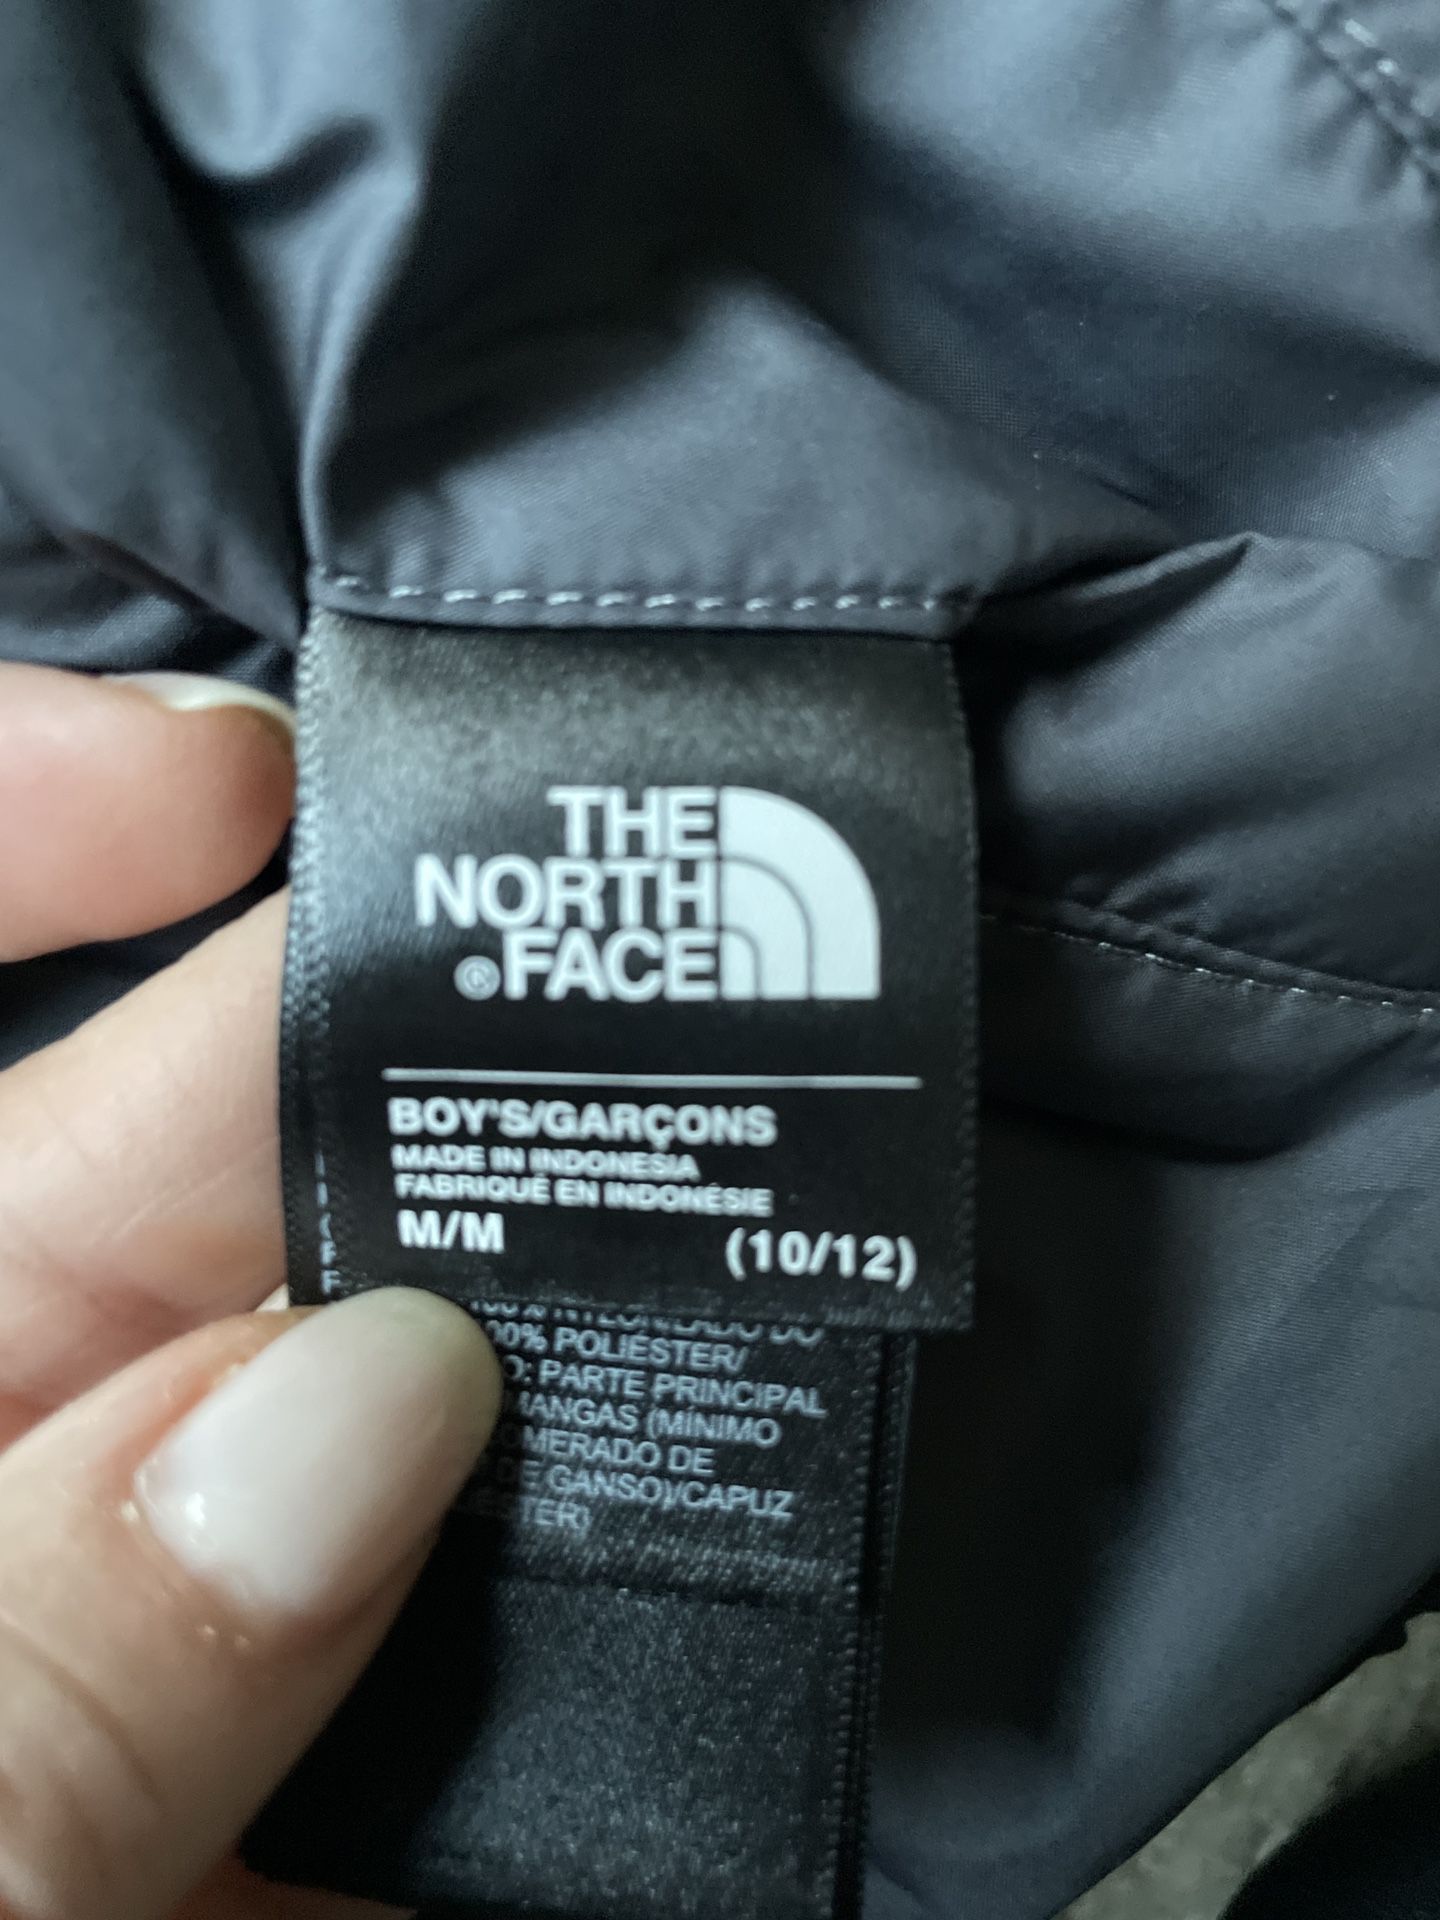 The north face Boys Reversible 550 Winter Jacket 10/12